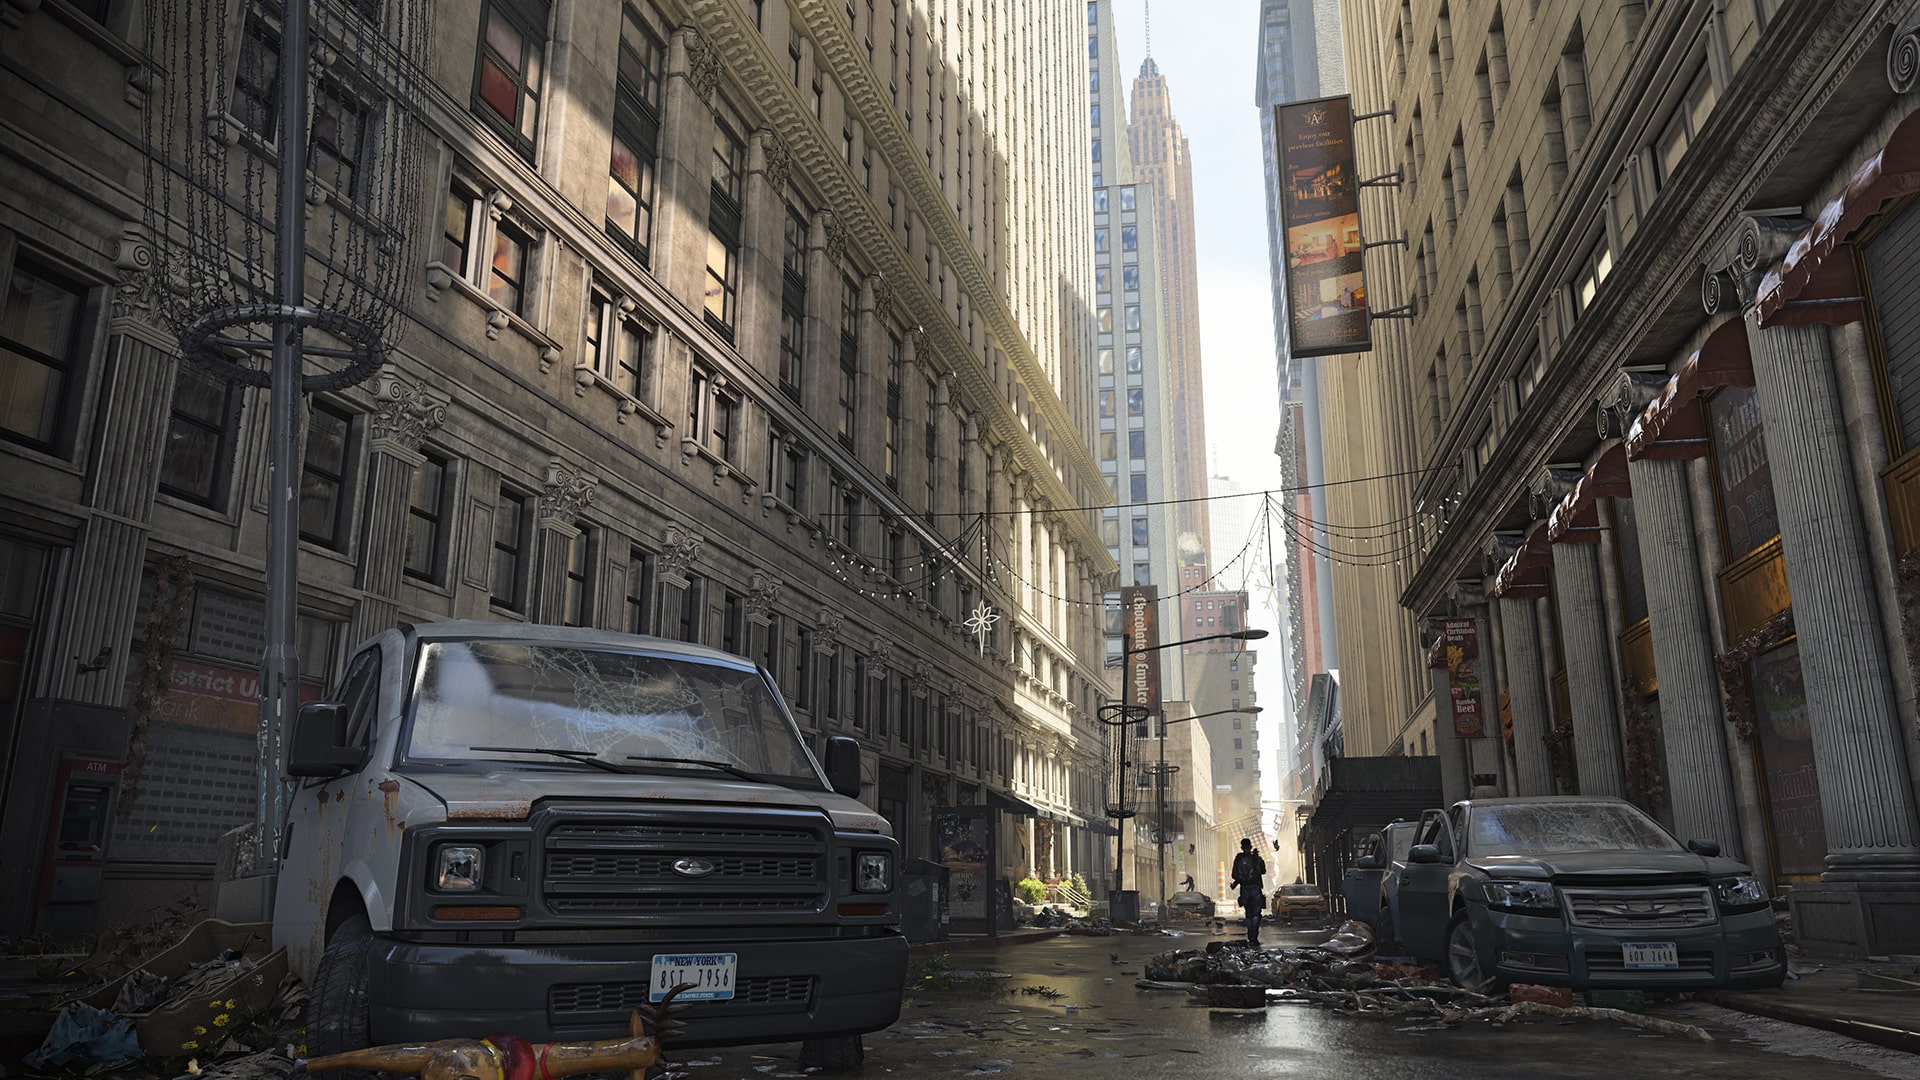 The Division 2 Warlords Of New York Ultimate Edition